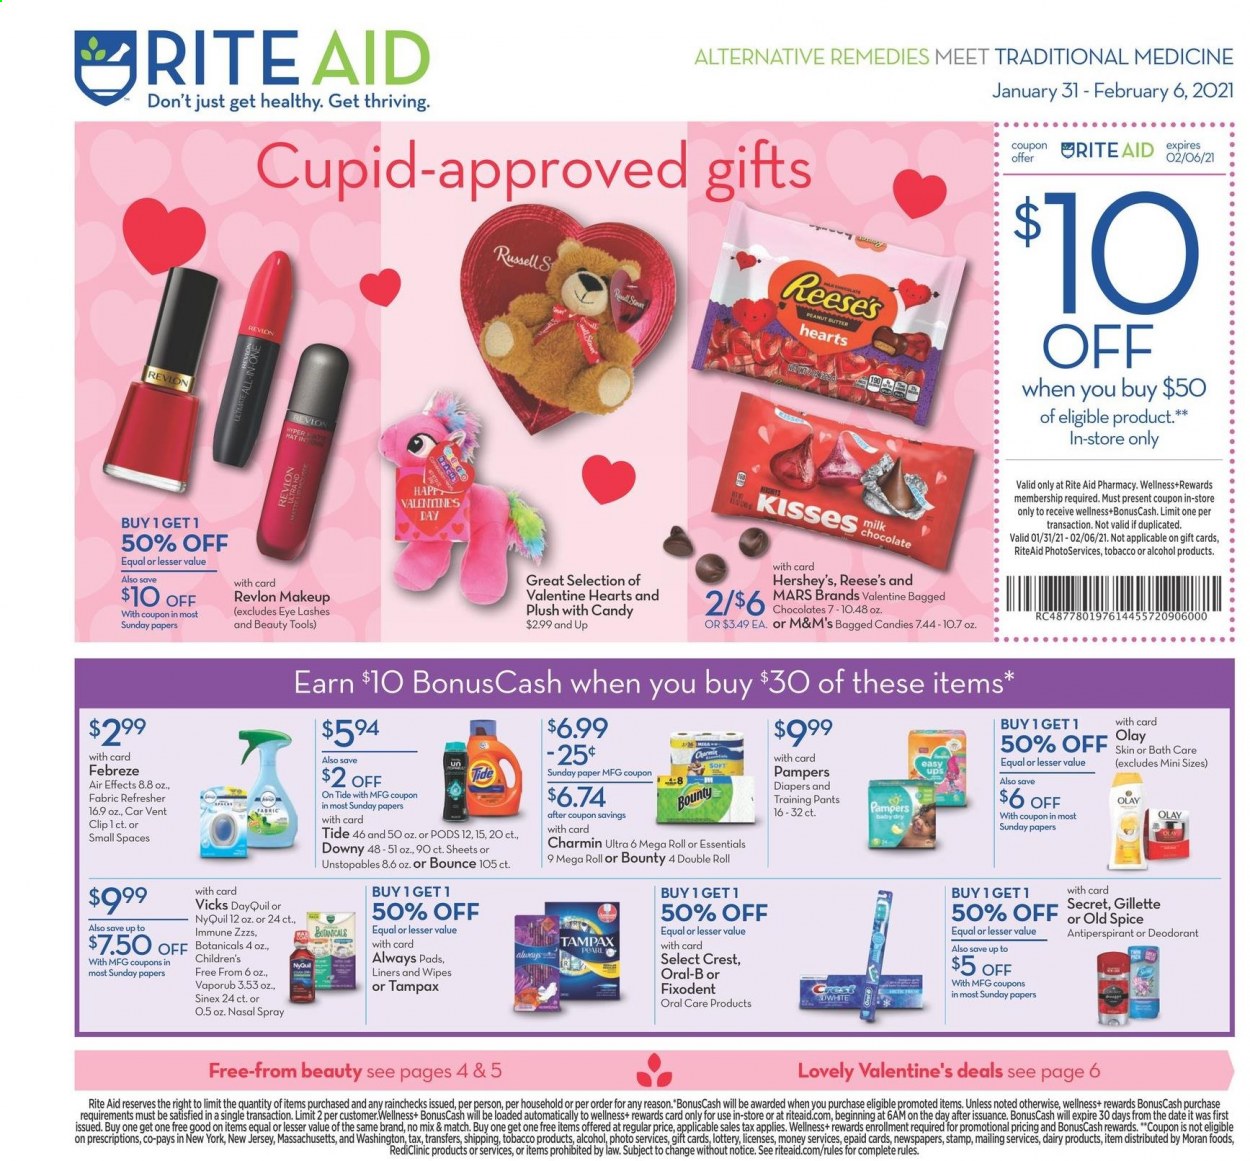 thumbnail - RITE AID Flyer - 01/31/2021 - 02/06/2021 - Sales products - milk, Reese's, Hershey's, chocolate, Bounty, Mars, M&M's, peanut butter, alcohol, Pampers, baby pants, Charmin, Febreze, wipes, Tide, Unstopables, Bounce, Old Spice, Oral-B, Fixodent, Crest, Tampax, Always pads, Olay, refresher, Revlon, anti-perspirant, deodorant, Gillette, Vicks, makeup, DayQuil, NyQuil, VapoRub, nasal spray, Sinex. Page 1.